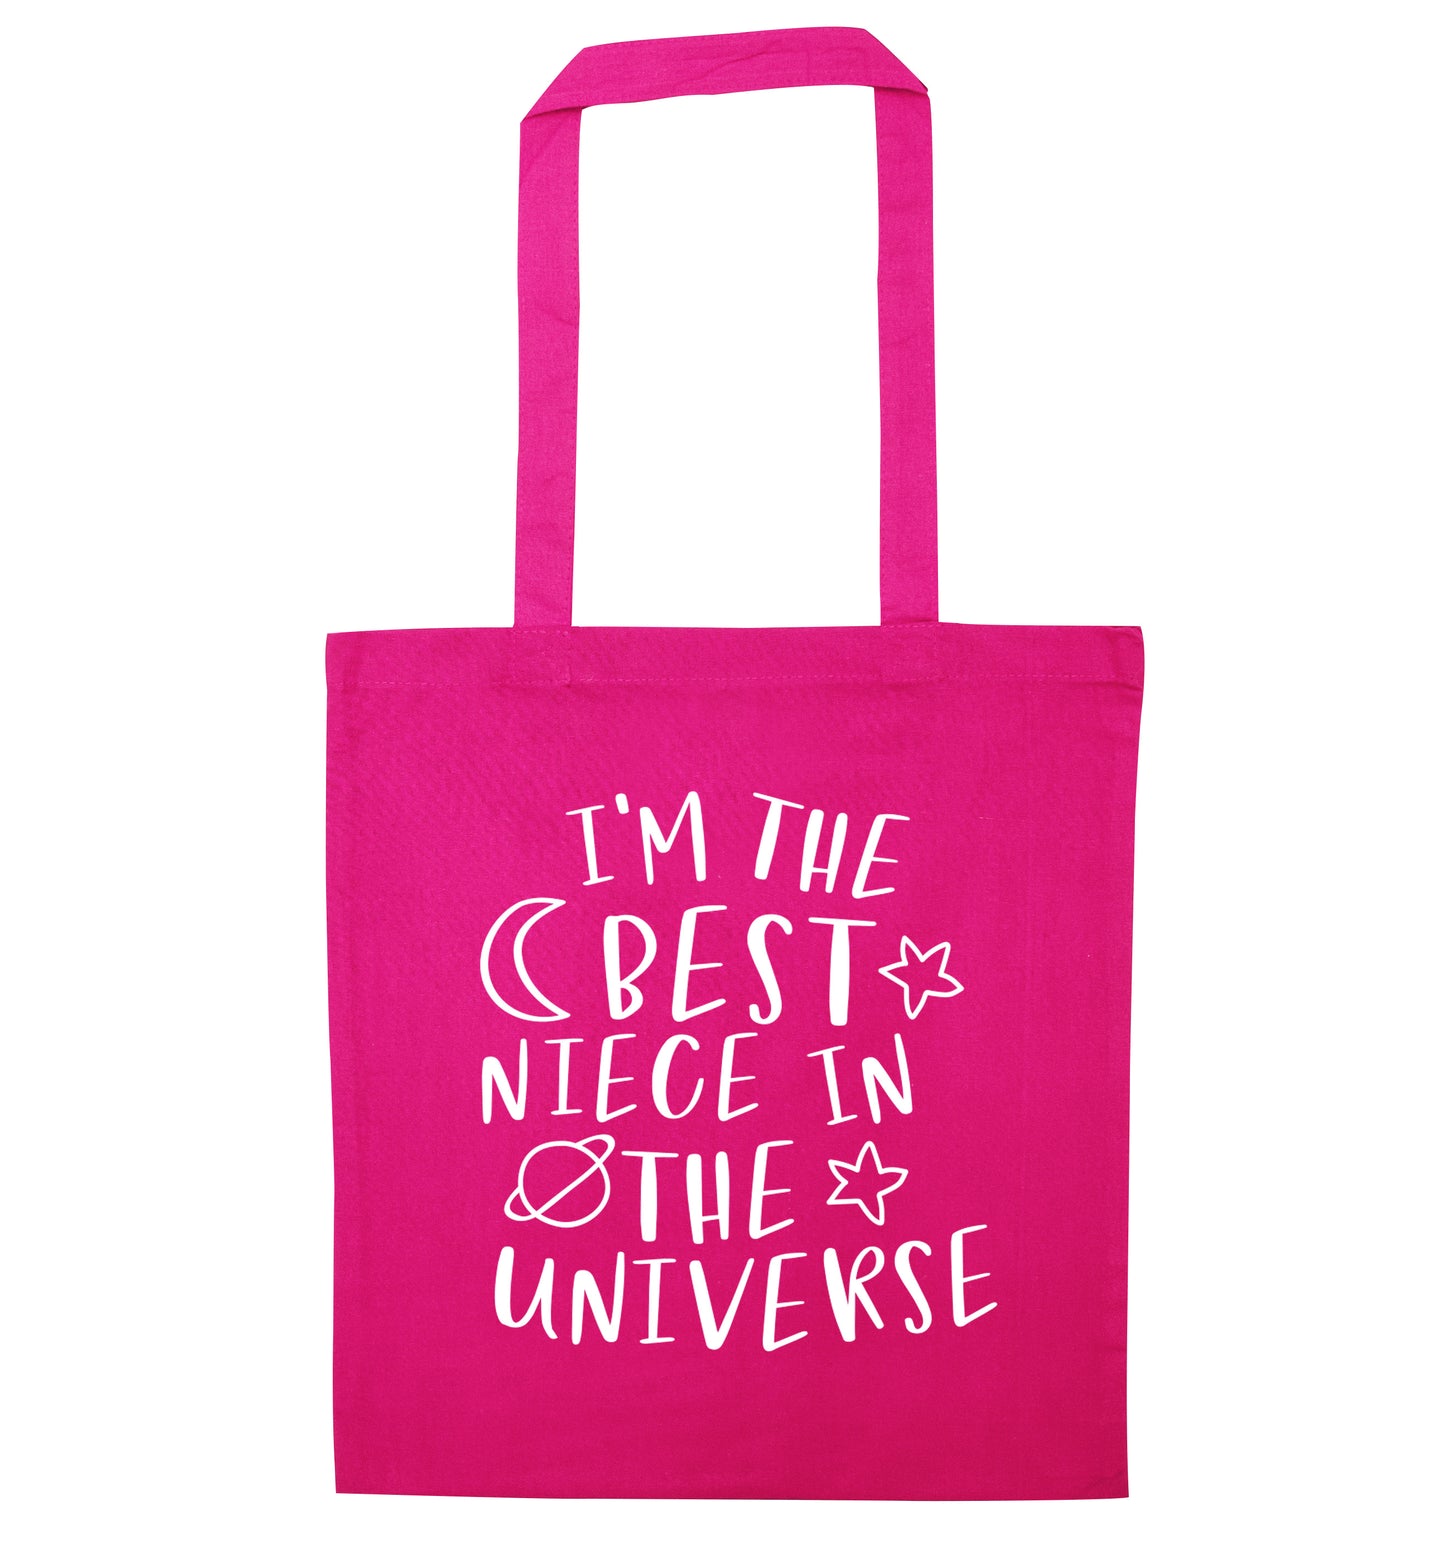 I'm the best niece in the universe pink tote bag